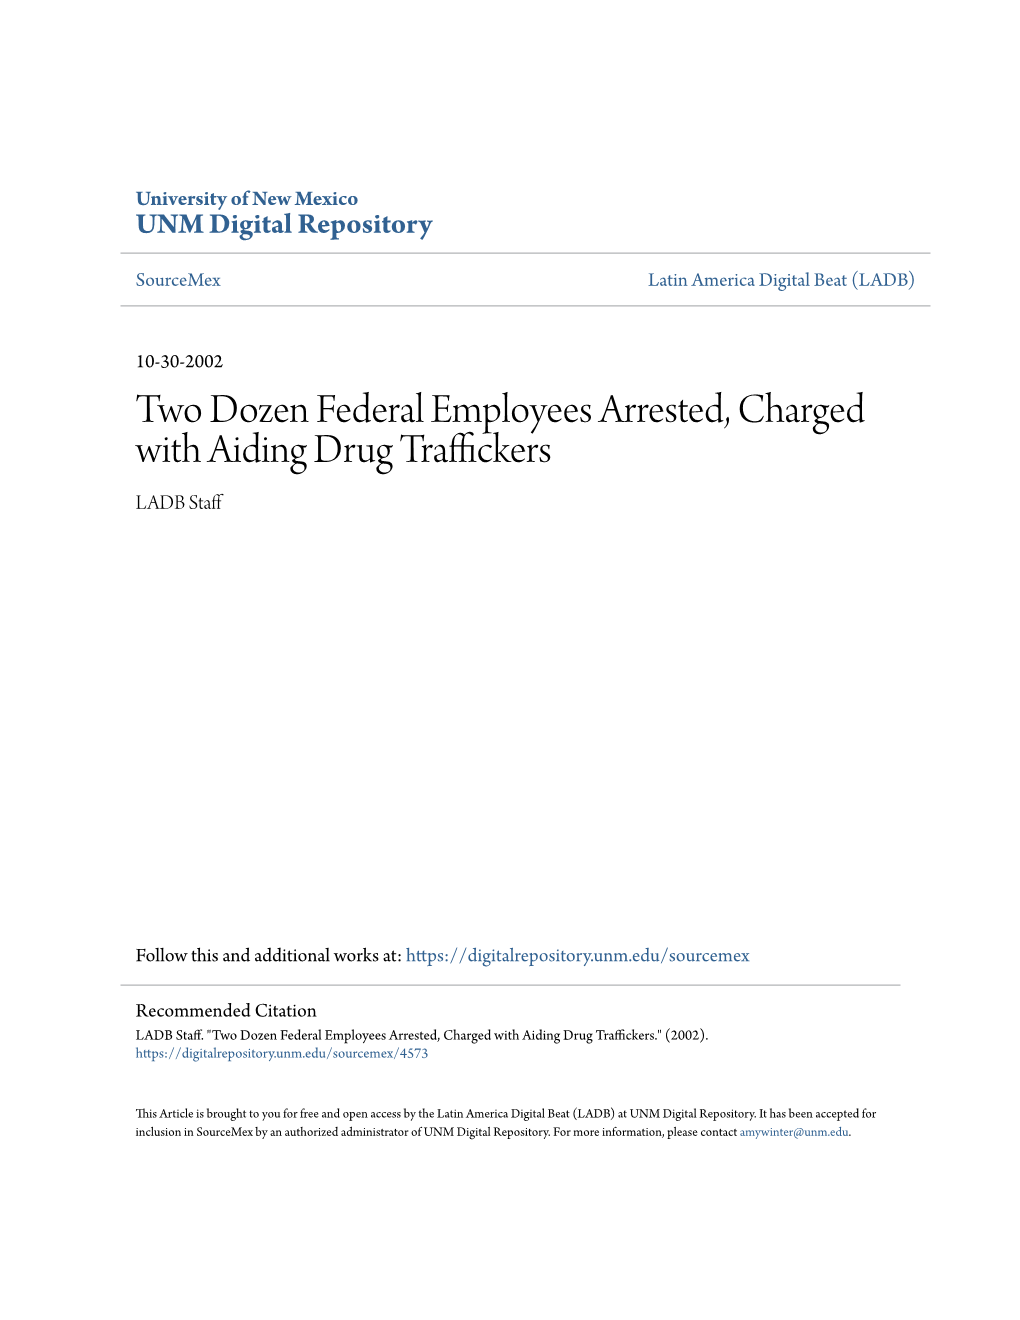 Two Dozen Federal Employees Arrested, Charged with Aiding Drug Traffickers LADB Staff